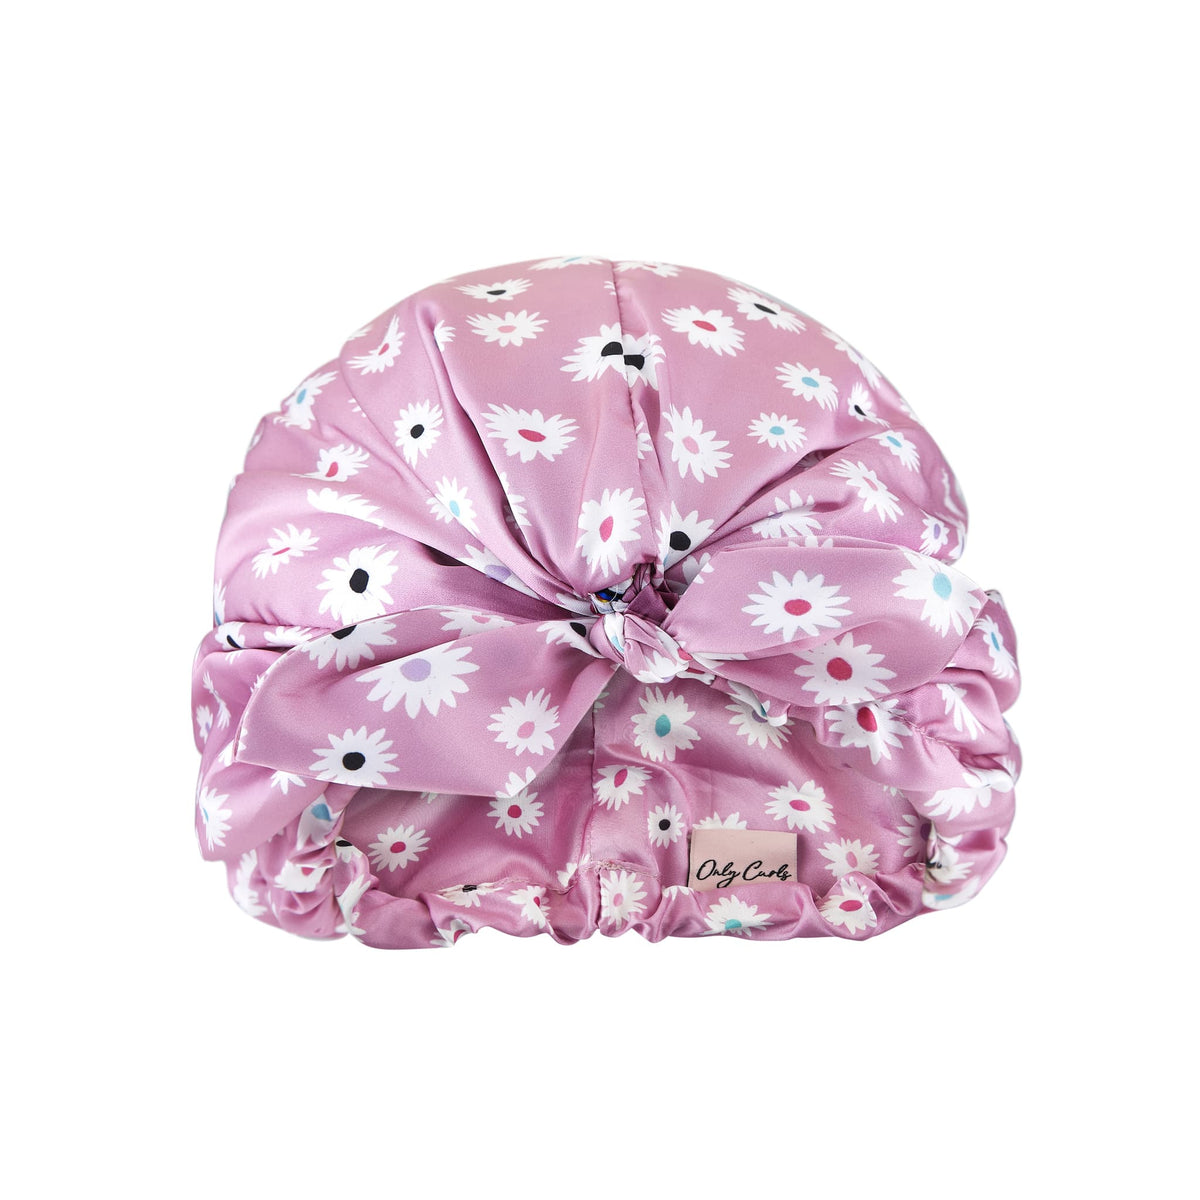 Only Curls Satin Sleep Turban - Dusty Pink Daisy - Only Curls